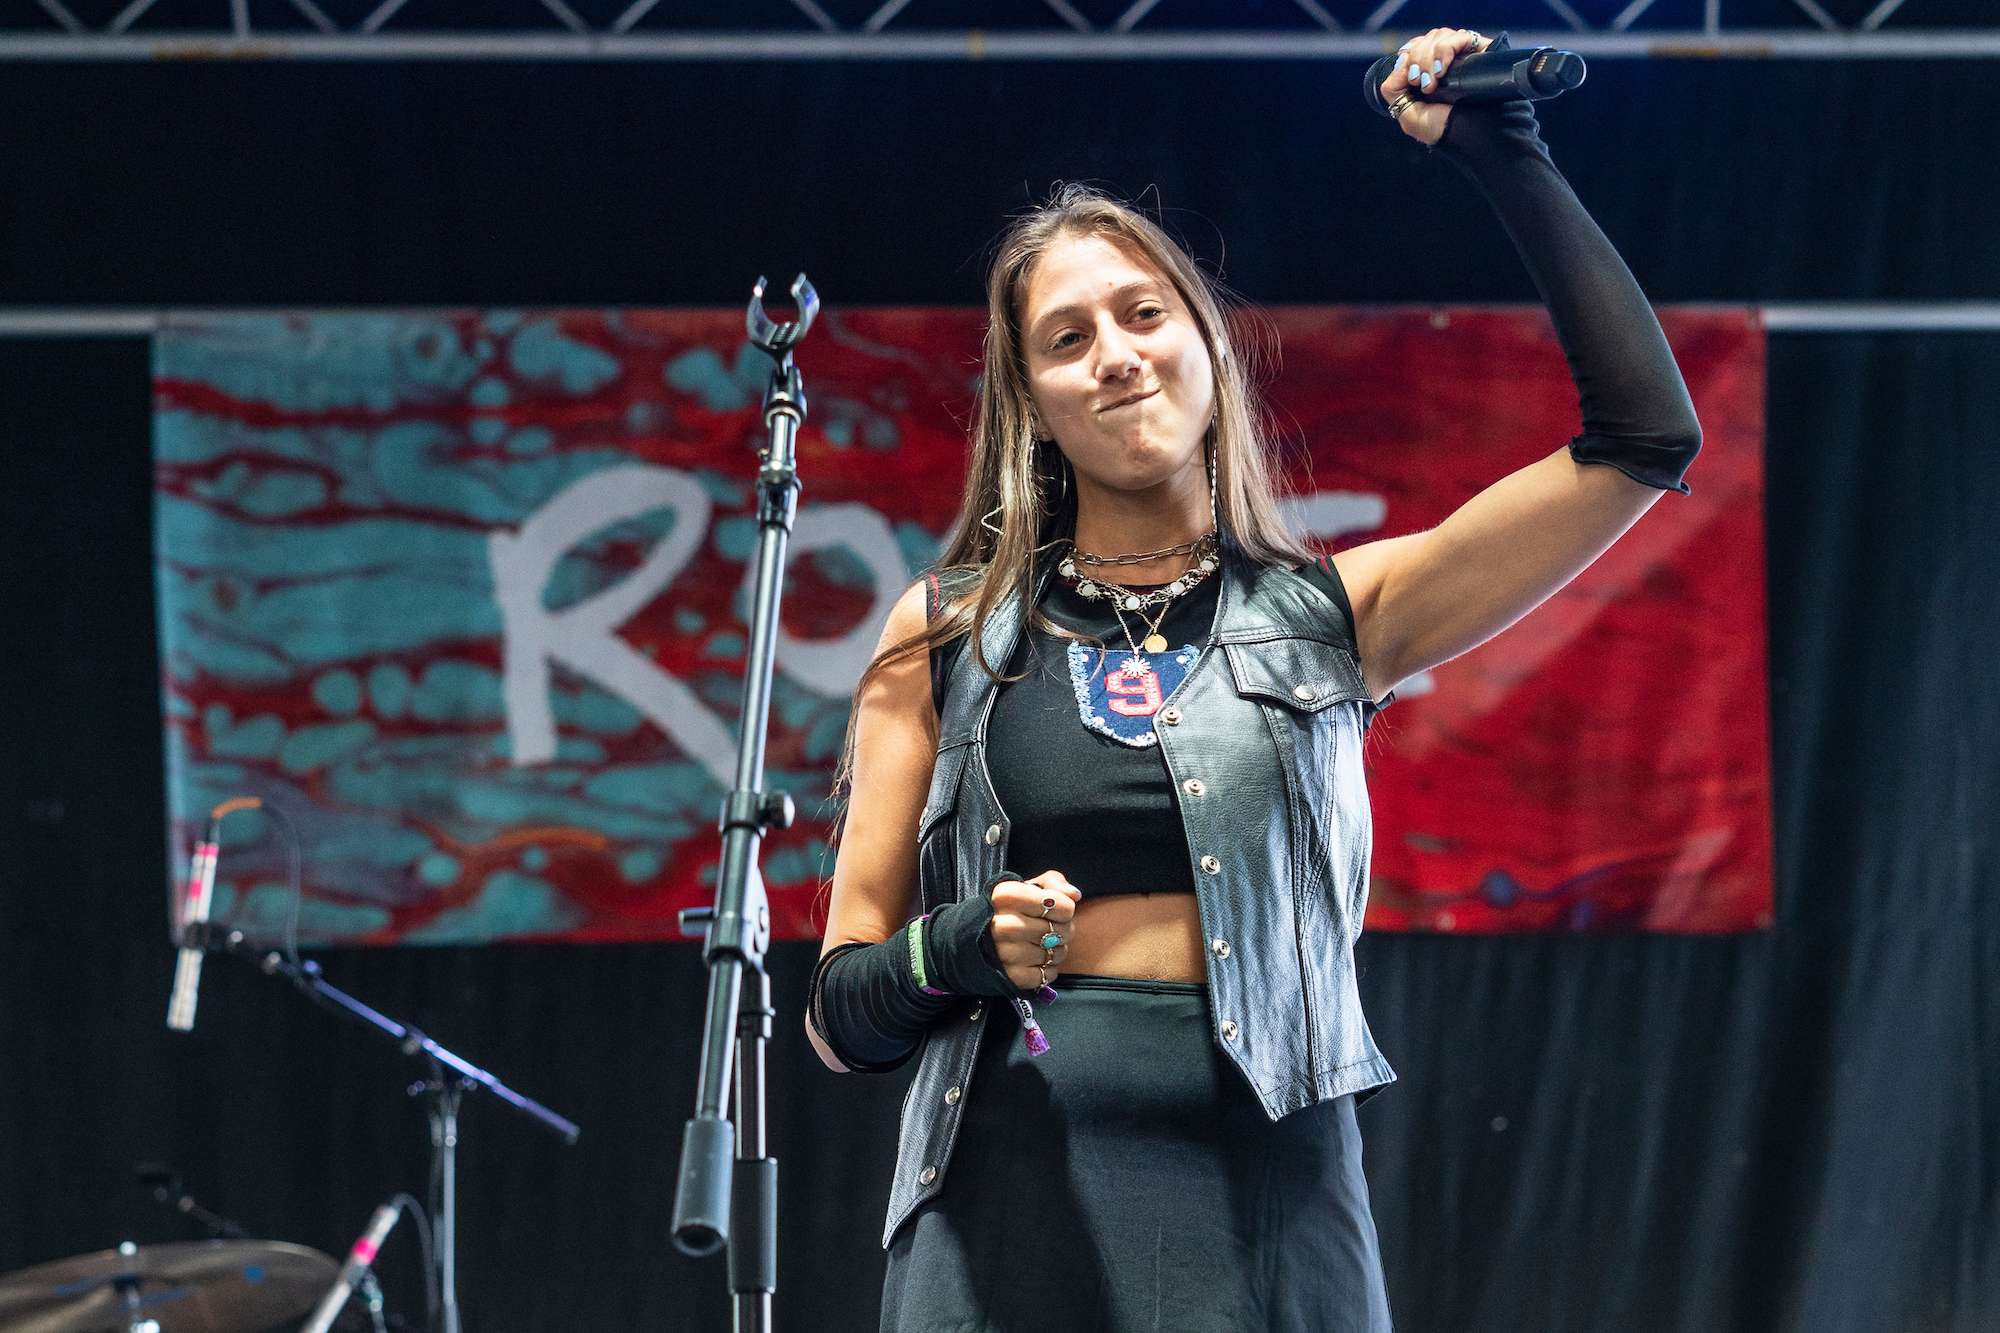 Rosie Live at Lollapalooza [GALLERY] 8